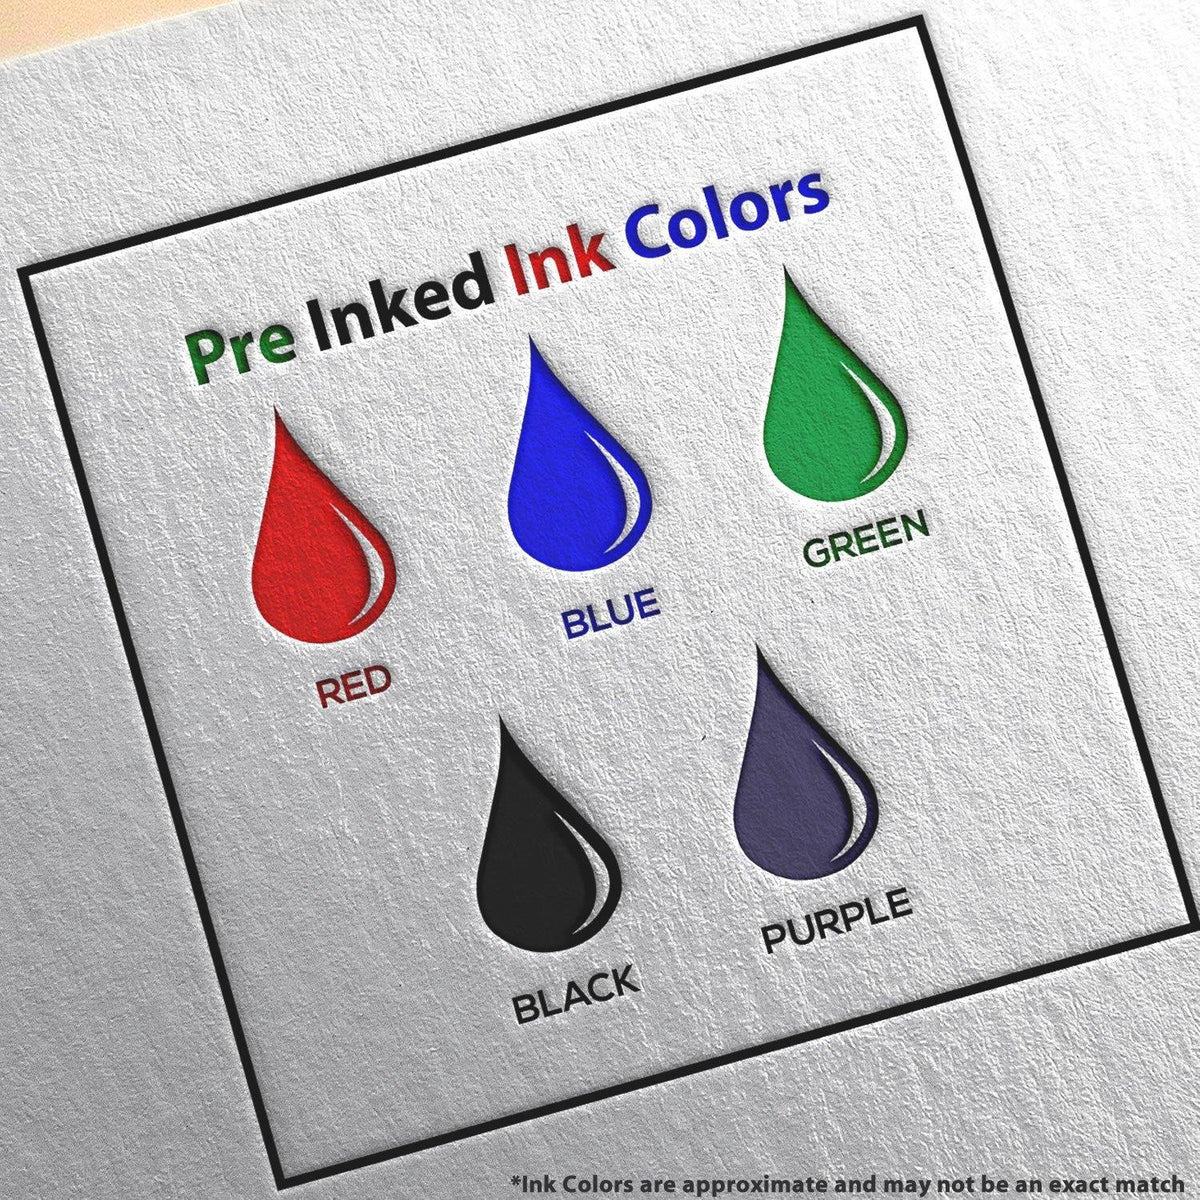 Large Pre Inked Completed Together In Class Stamp Ink Color Options